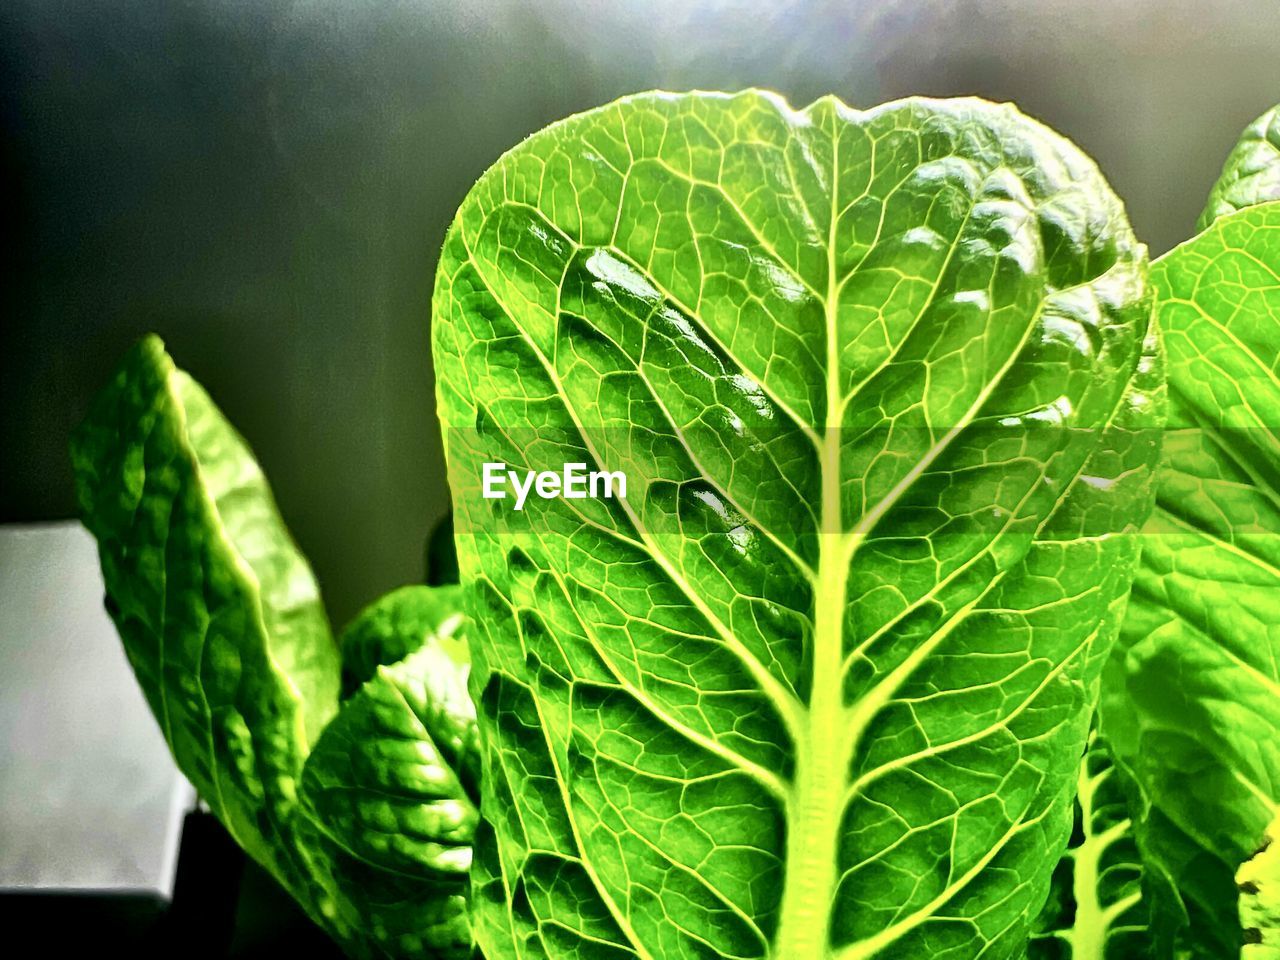 leaf, plant part, green, plant, nature, freshness, food and drink, produce, food, growth, vegetable, close-up, leaf vegetable, healthy eating, no people, leaf vein, wellbeing, beauty in nature, outdoors, flower, day, chard, environment